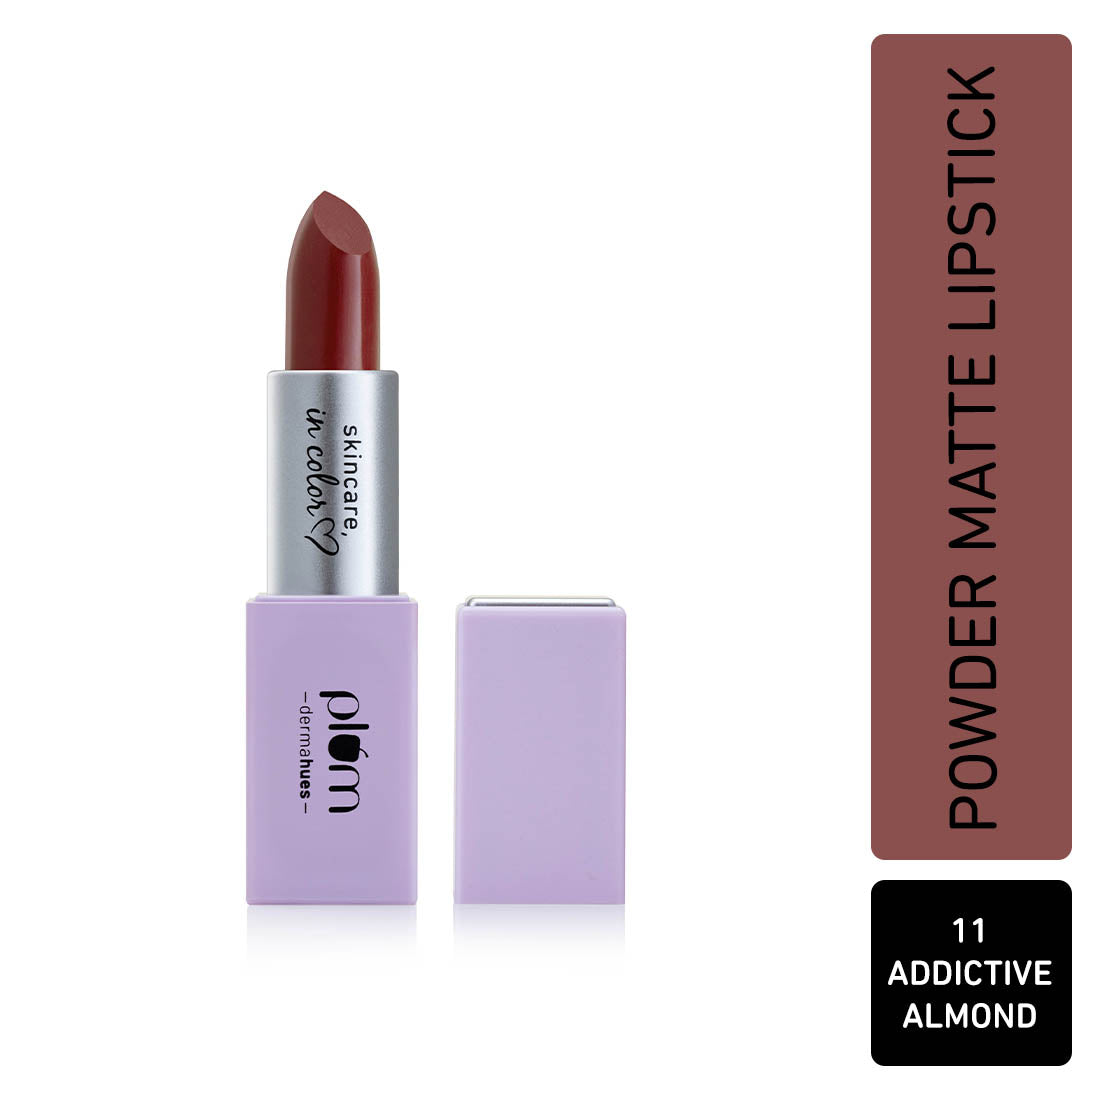 

Plum Velvet Haze Matte Lipstick with SPF 30 | Powder Matte Finish | Highly Pigmented | With Ceramides | 01 Nifty Nude, 11 Addictive Almond